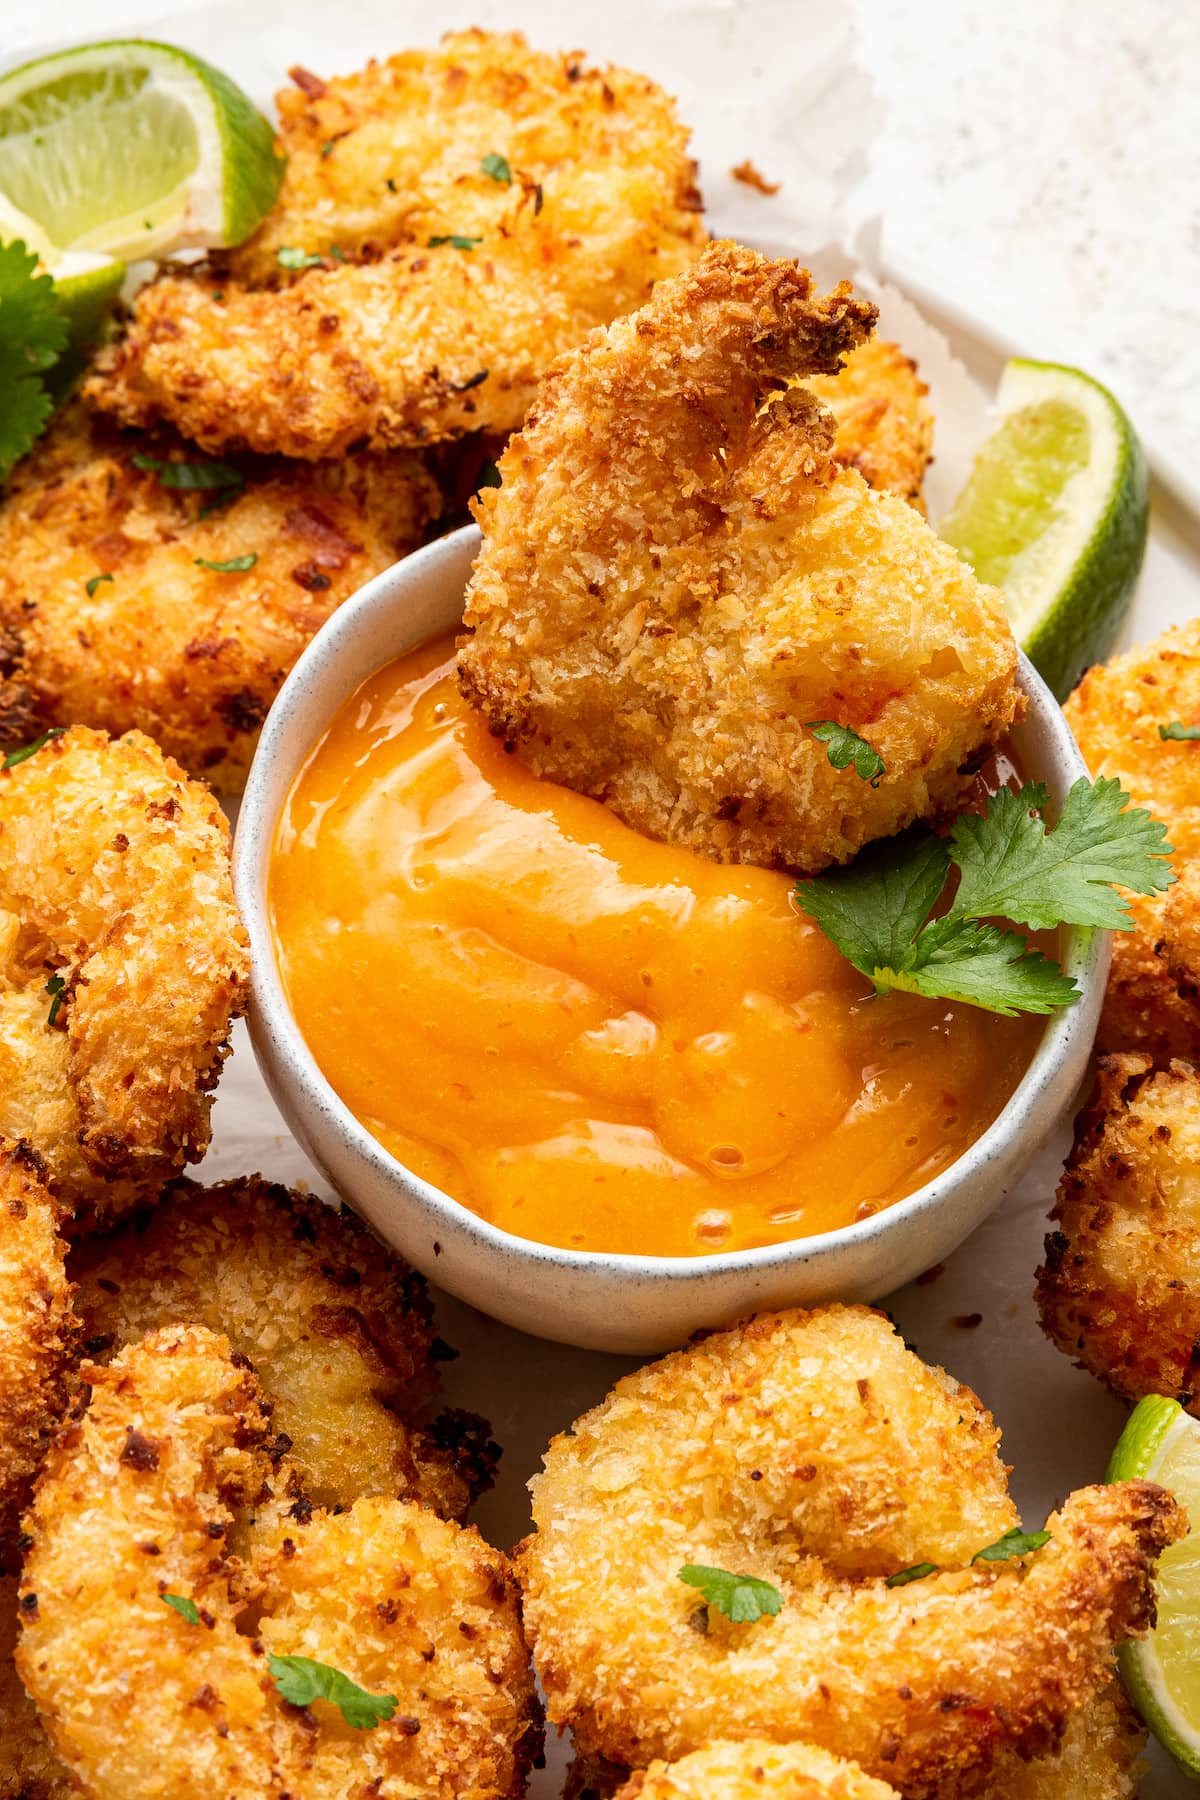 Coconut shrimp served with sauce.